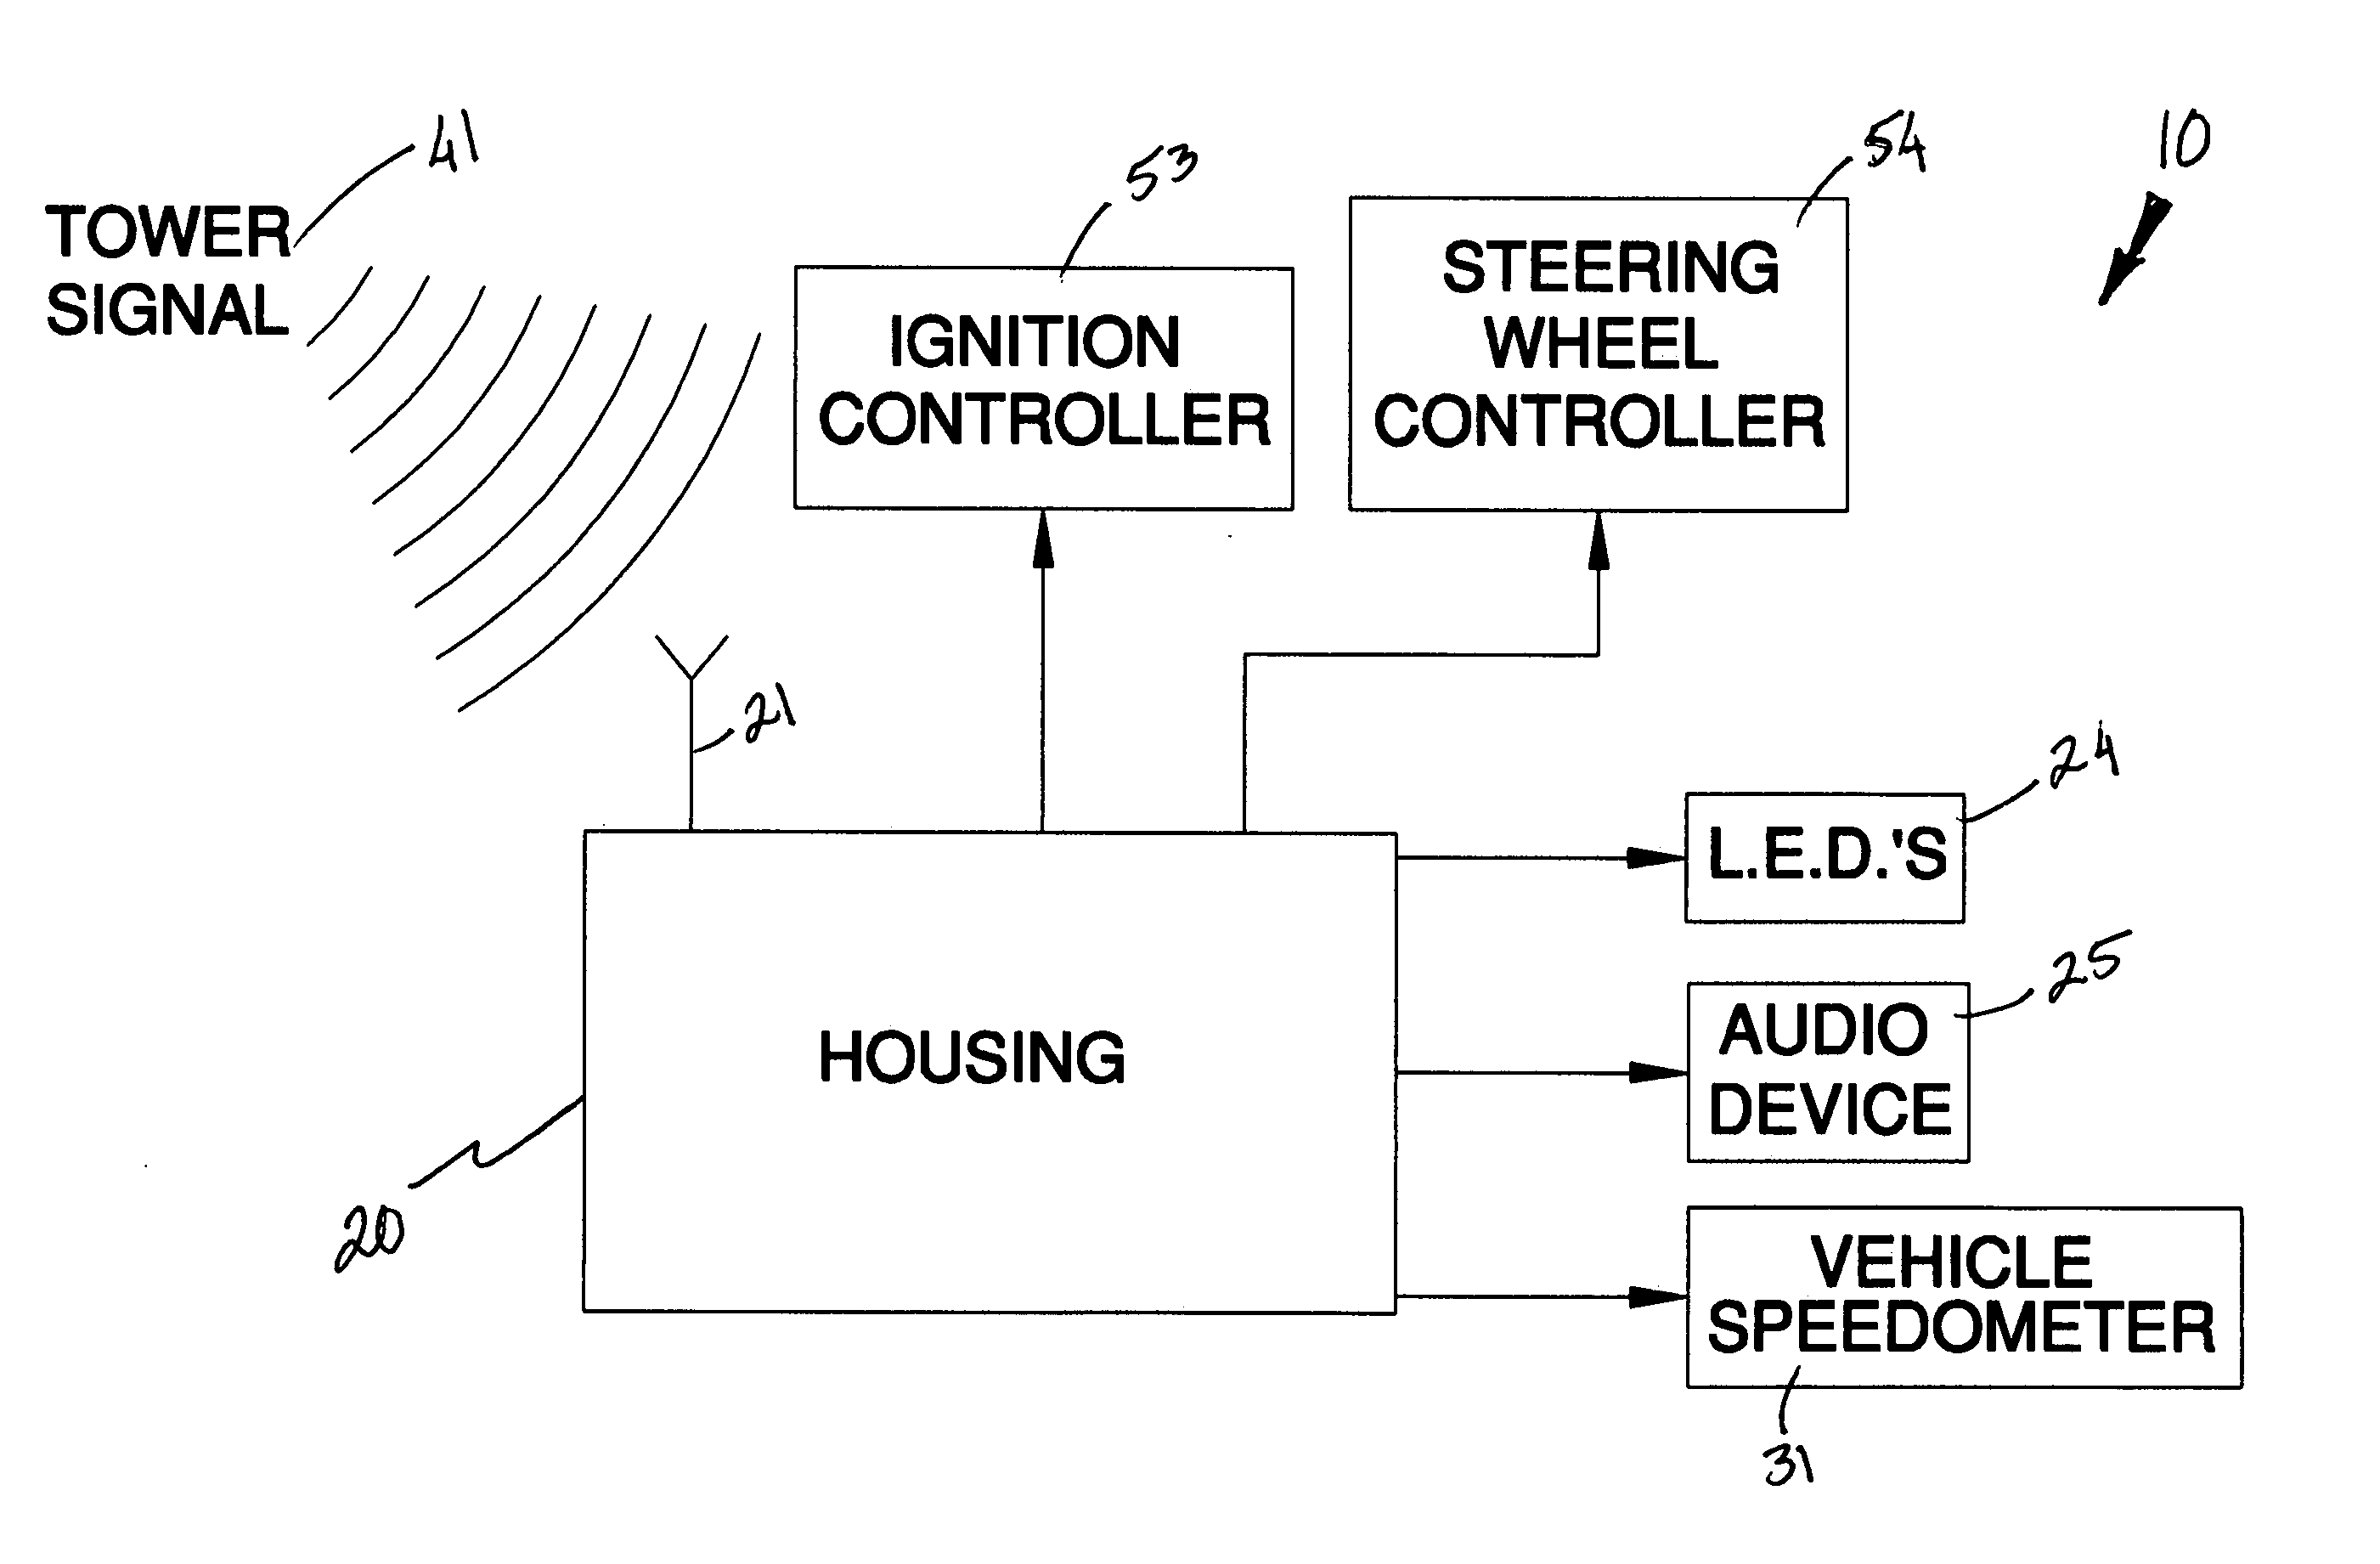 Wireless system for notifying a driver of an oncoming emergency vehicle